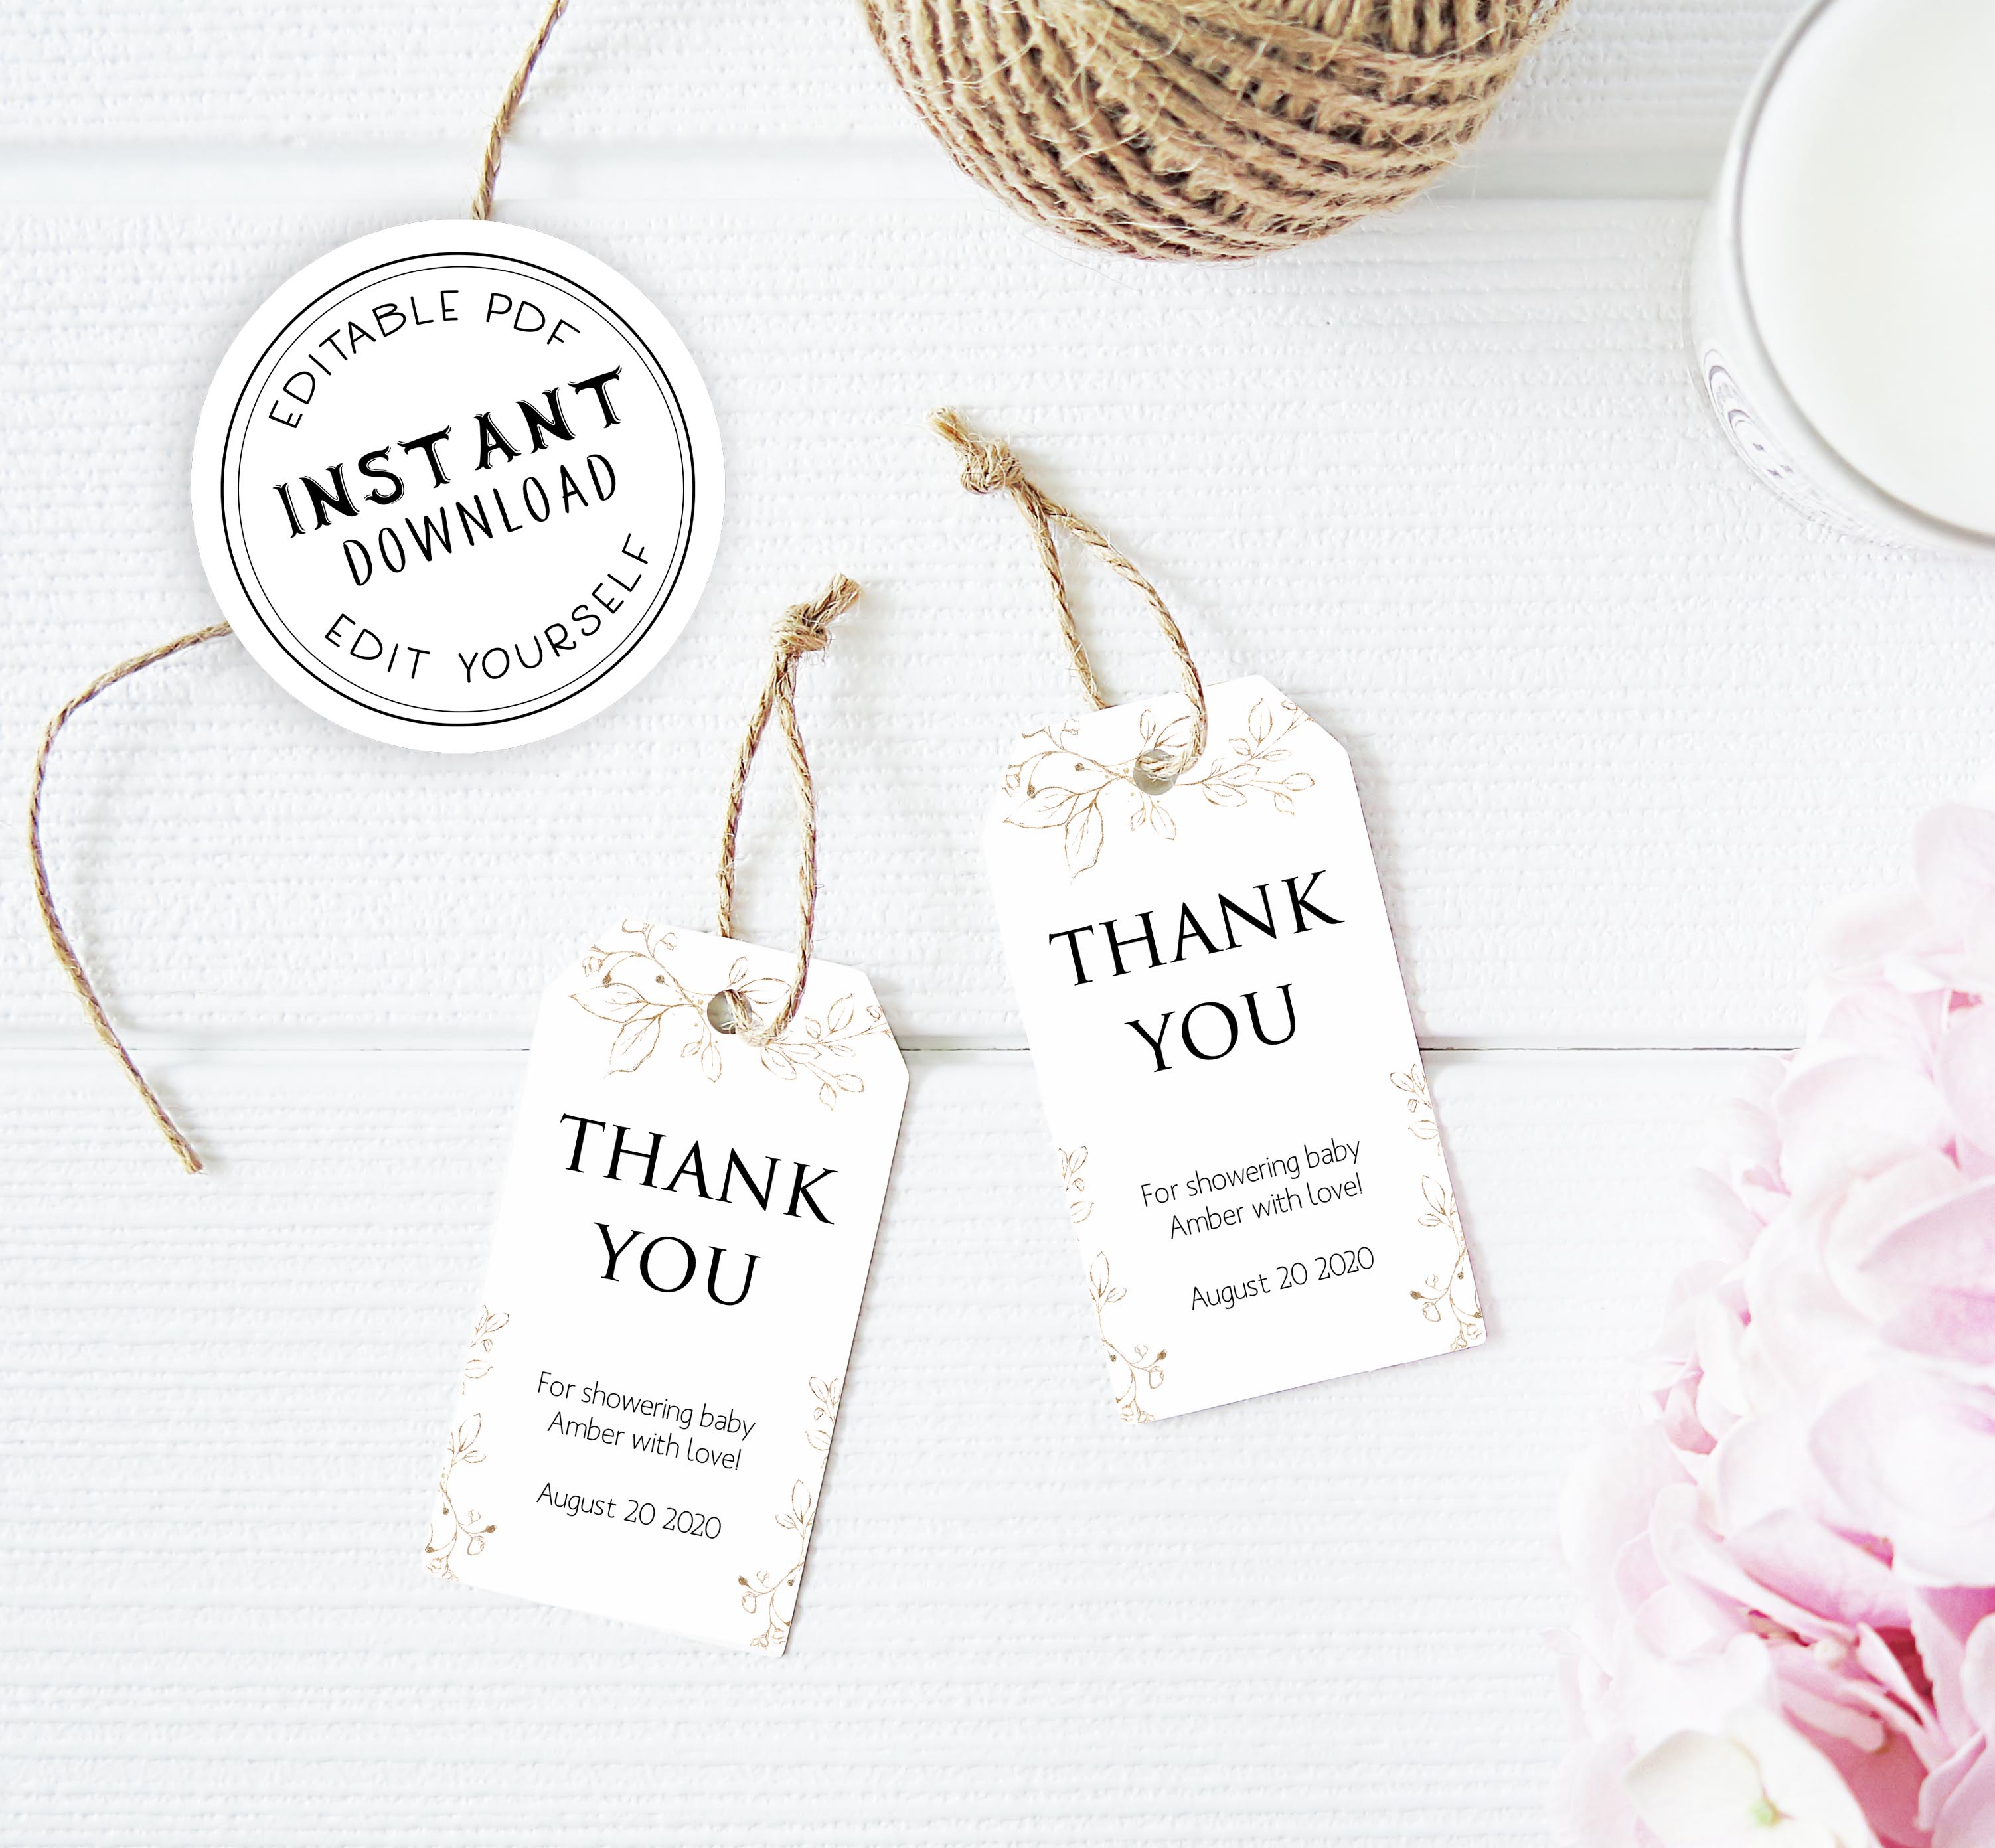 Thank you tags, Printable baby shower games, gold leaf baby games, baby shower games, fun baby shower ideas, top baby shower ideas, gold leaf baby shower, baby shower games, fun gold leaf baby shower ideas